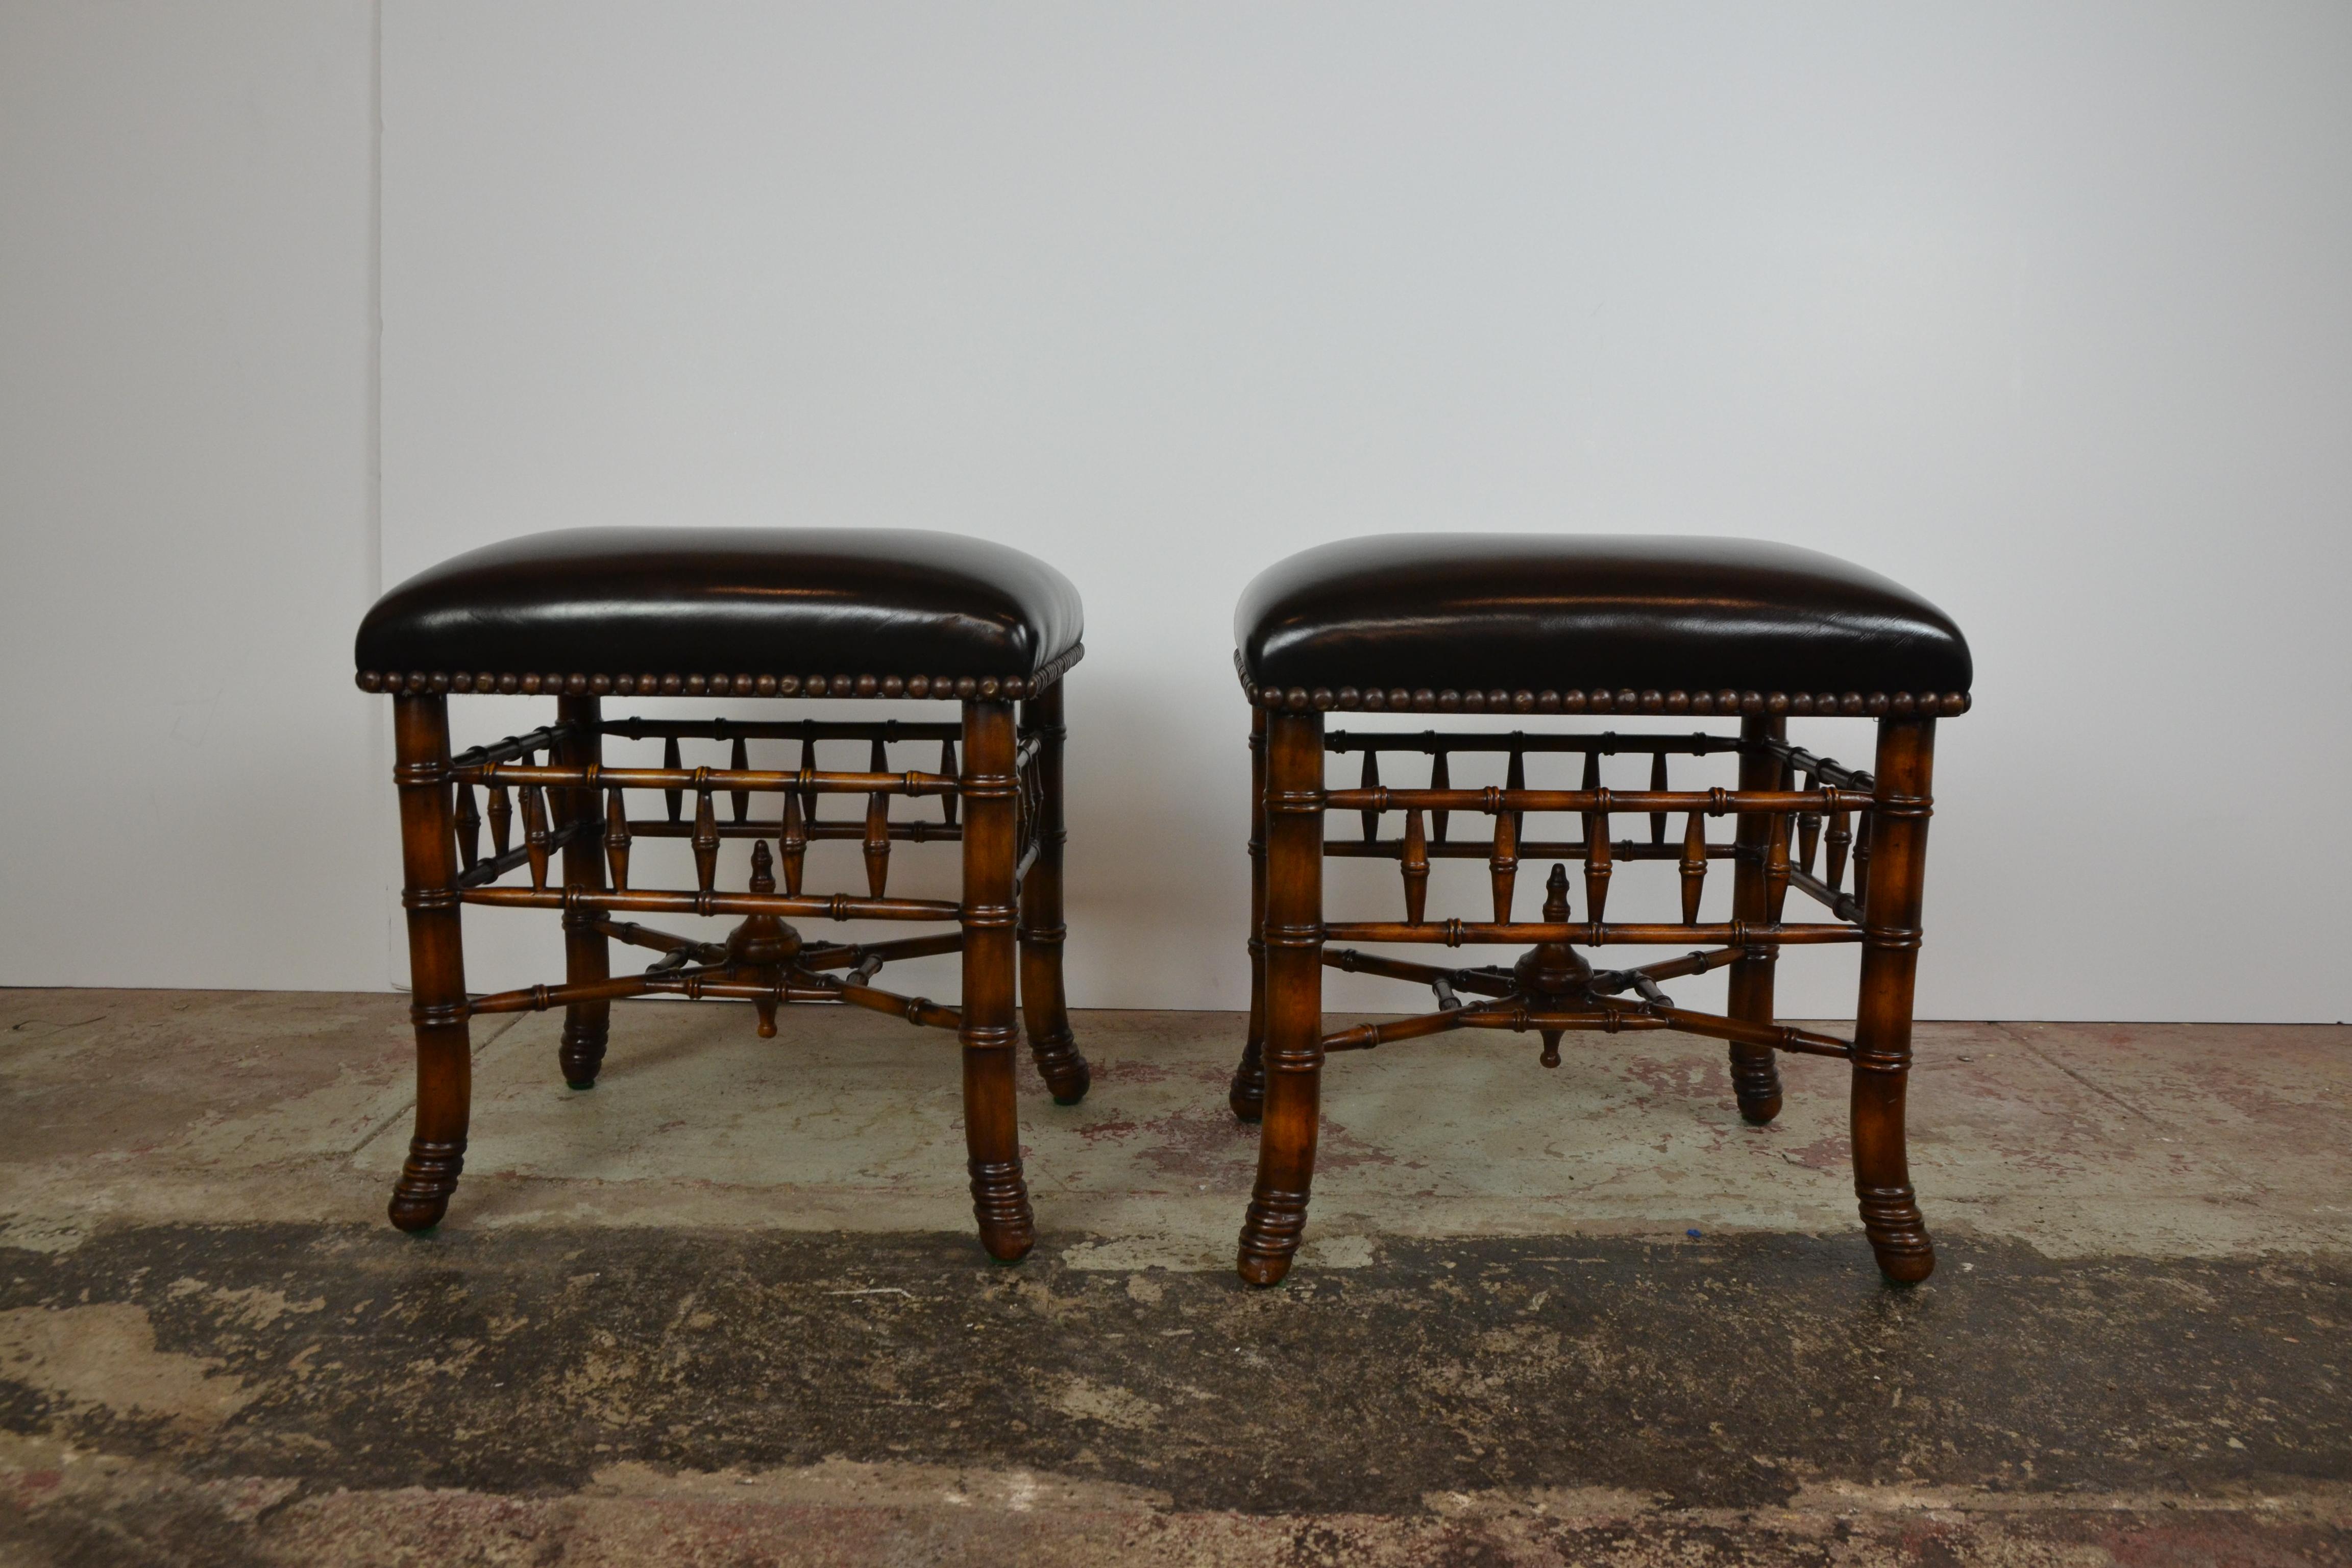 A wonderful pair of benches or stools of exceptional quality. Finely carved legs, rails and stretchers that show their quality detail from any angle. Faux black leather tops with heavy brass studs. Theodore Alexander.